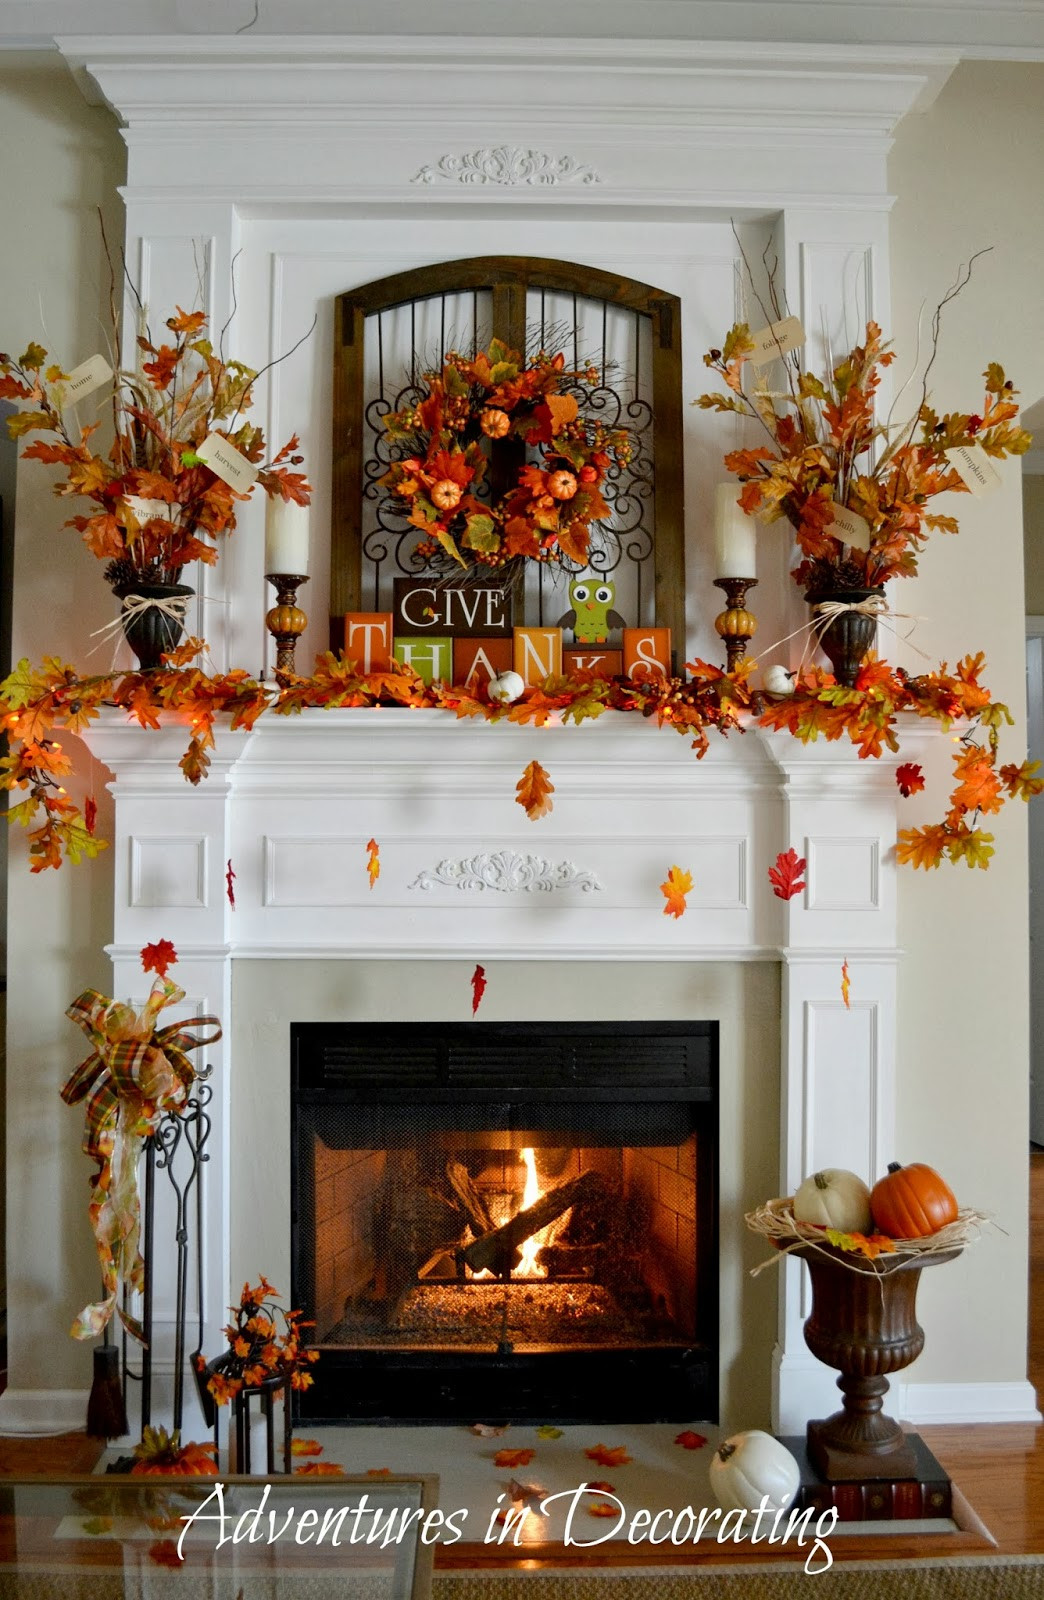 Fall Mantle Decorating Ideas
 Adventures in Decorating Our Fall Mantel